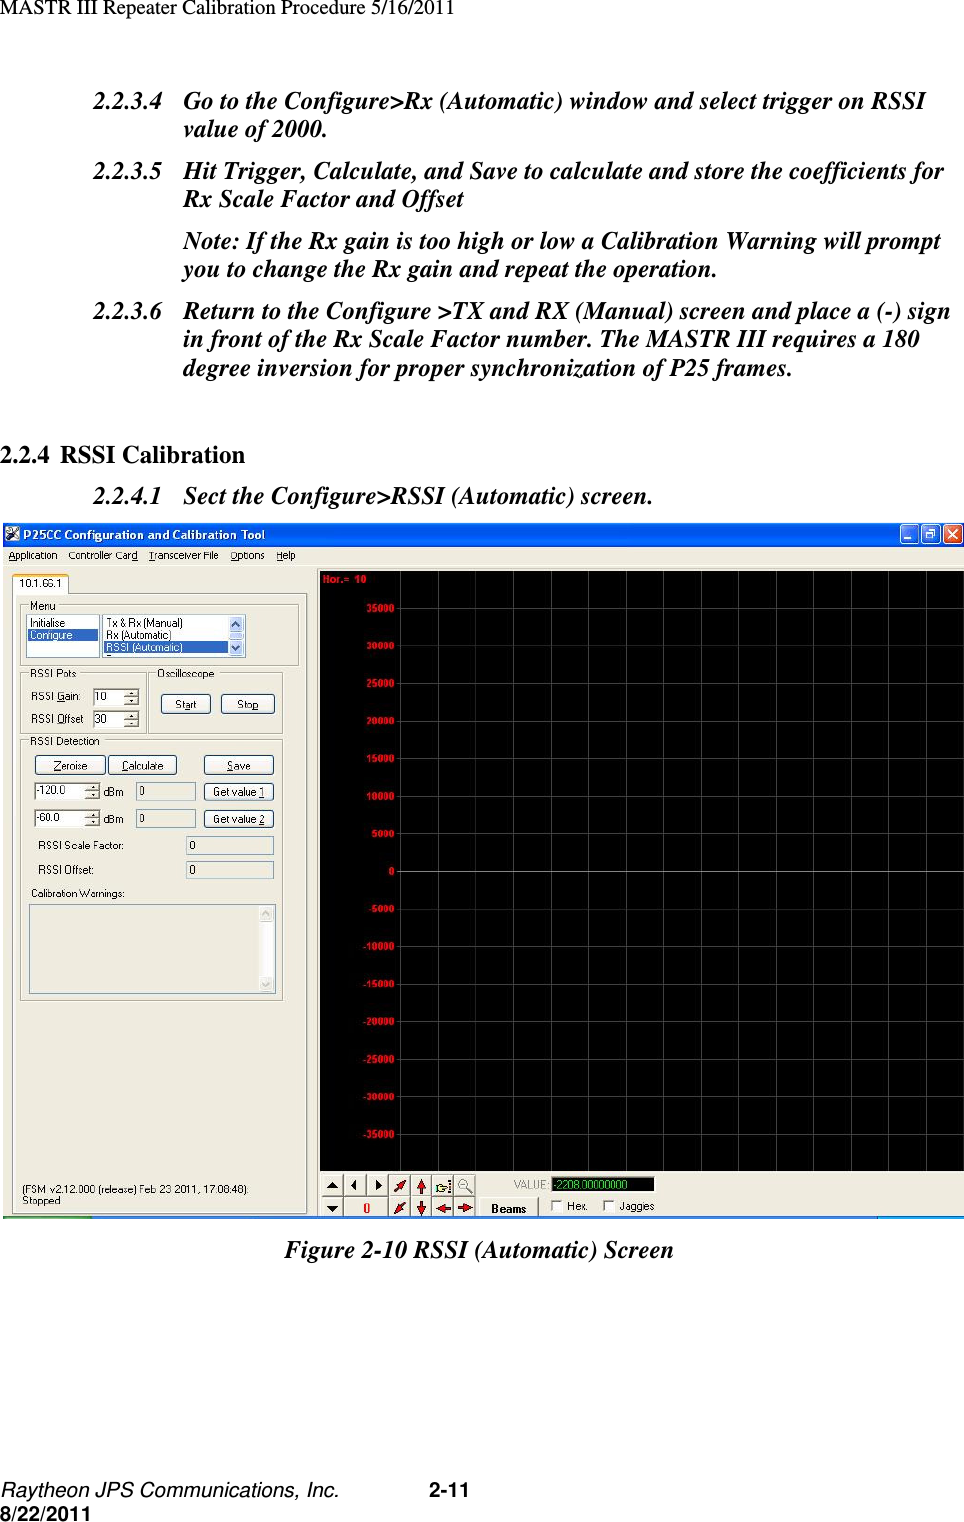 MASTR III Repeater Calibration Procedure 5/16/2011 Raytheon JPS Communications, Inc. 2-11 8/22/2011 2.2.3.4 Go to the Configure&gt;Rx (Automatic) window and select trigger on RSSI value of 2000. 2.2.3.5 Hit Trigger, Calculate, and Save to calculate and store the coefficients for Rx Scale Factor and Offset  Note: If the Rx gain is too high or low a Calibration Warning will prompt you to change the Rx gain and repeat the operation. 2.2.3.6 Return to the Configure &gt;TX and RX (Manual) screen and place a (-) sign in front of the Rx Scale Factor number. The MASTR III requires a 180 degree inversion for proper synchronization of P25 frames.  2.2.4 RSSI Calibration 2.2.4.1 Sect the Configure&gt;RSSI (Automatic) screen.  Figure 2-10 RSSI (Automatic) Screen 